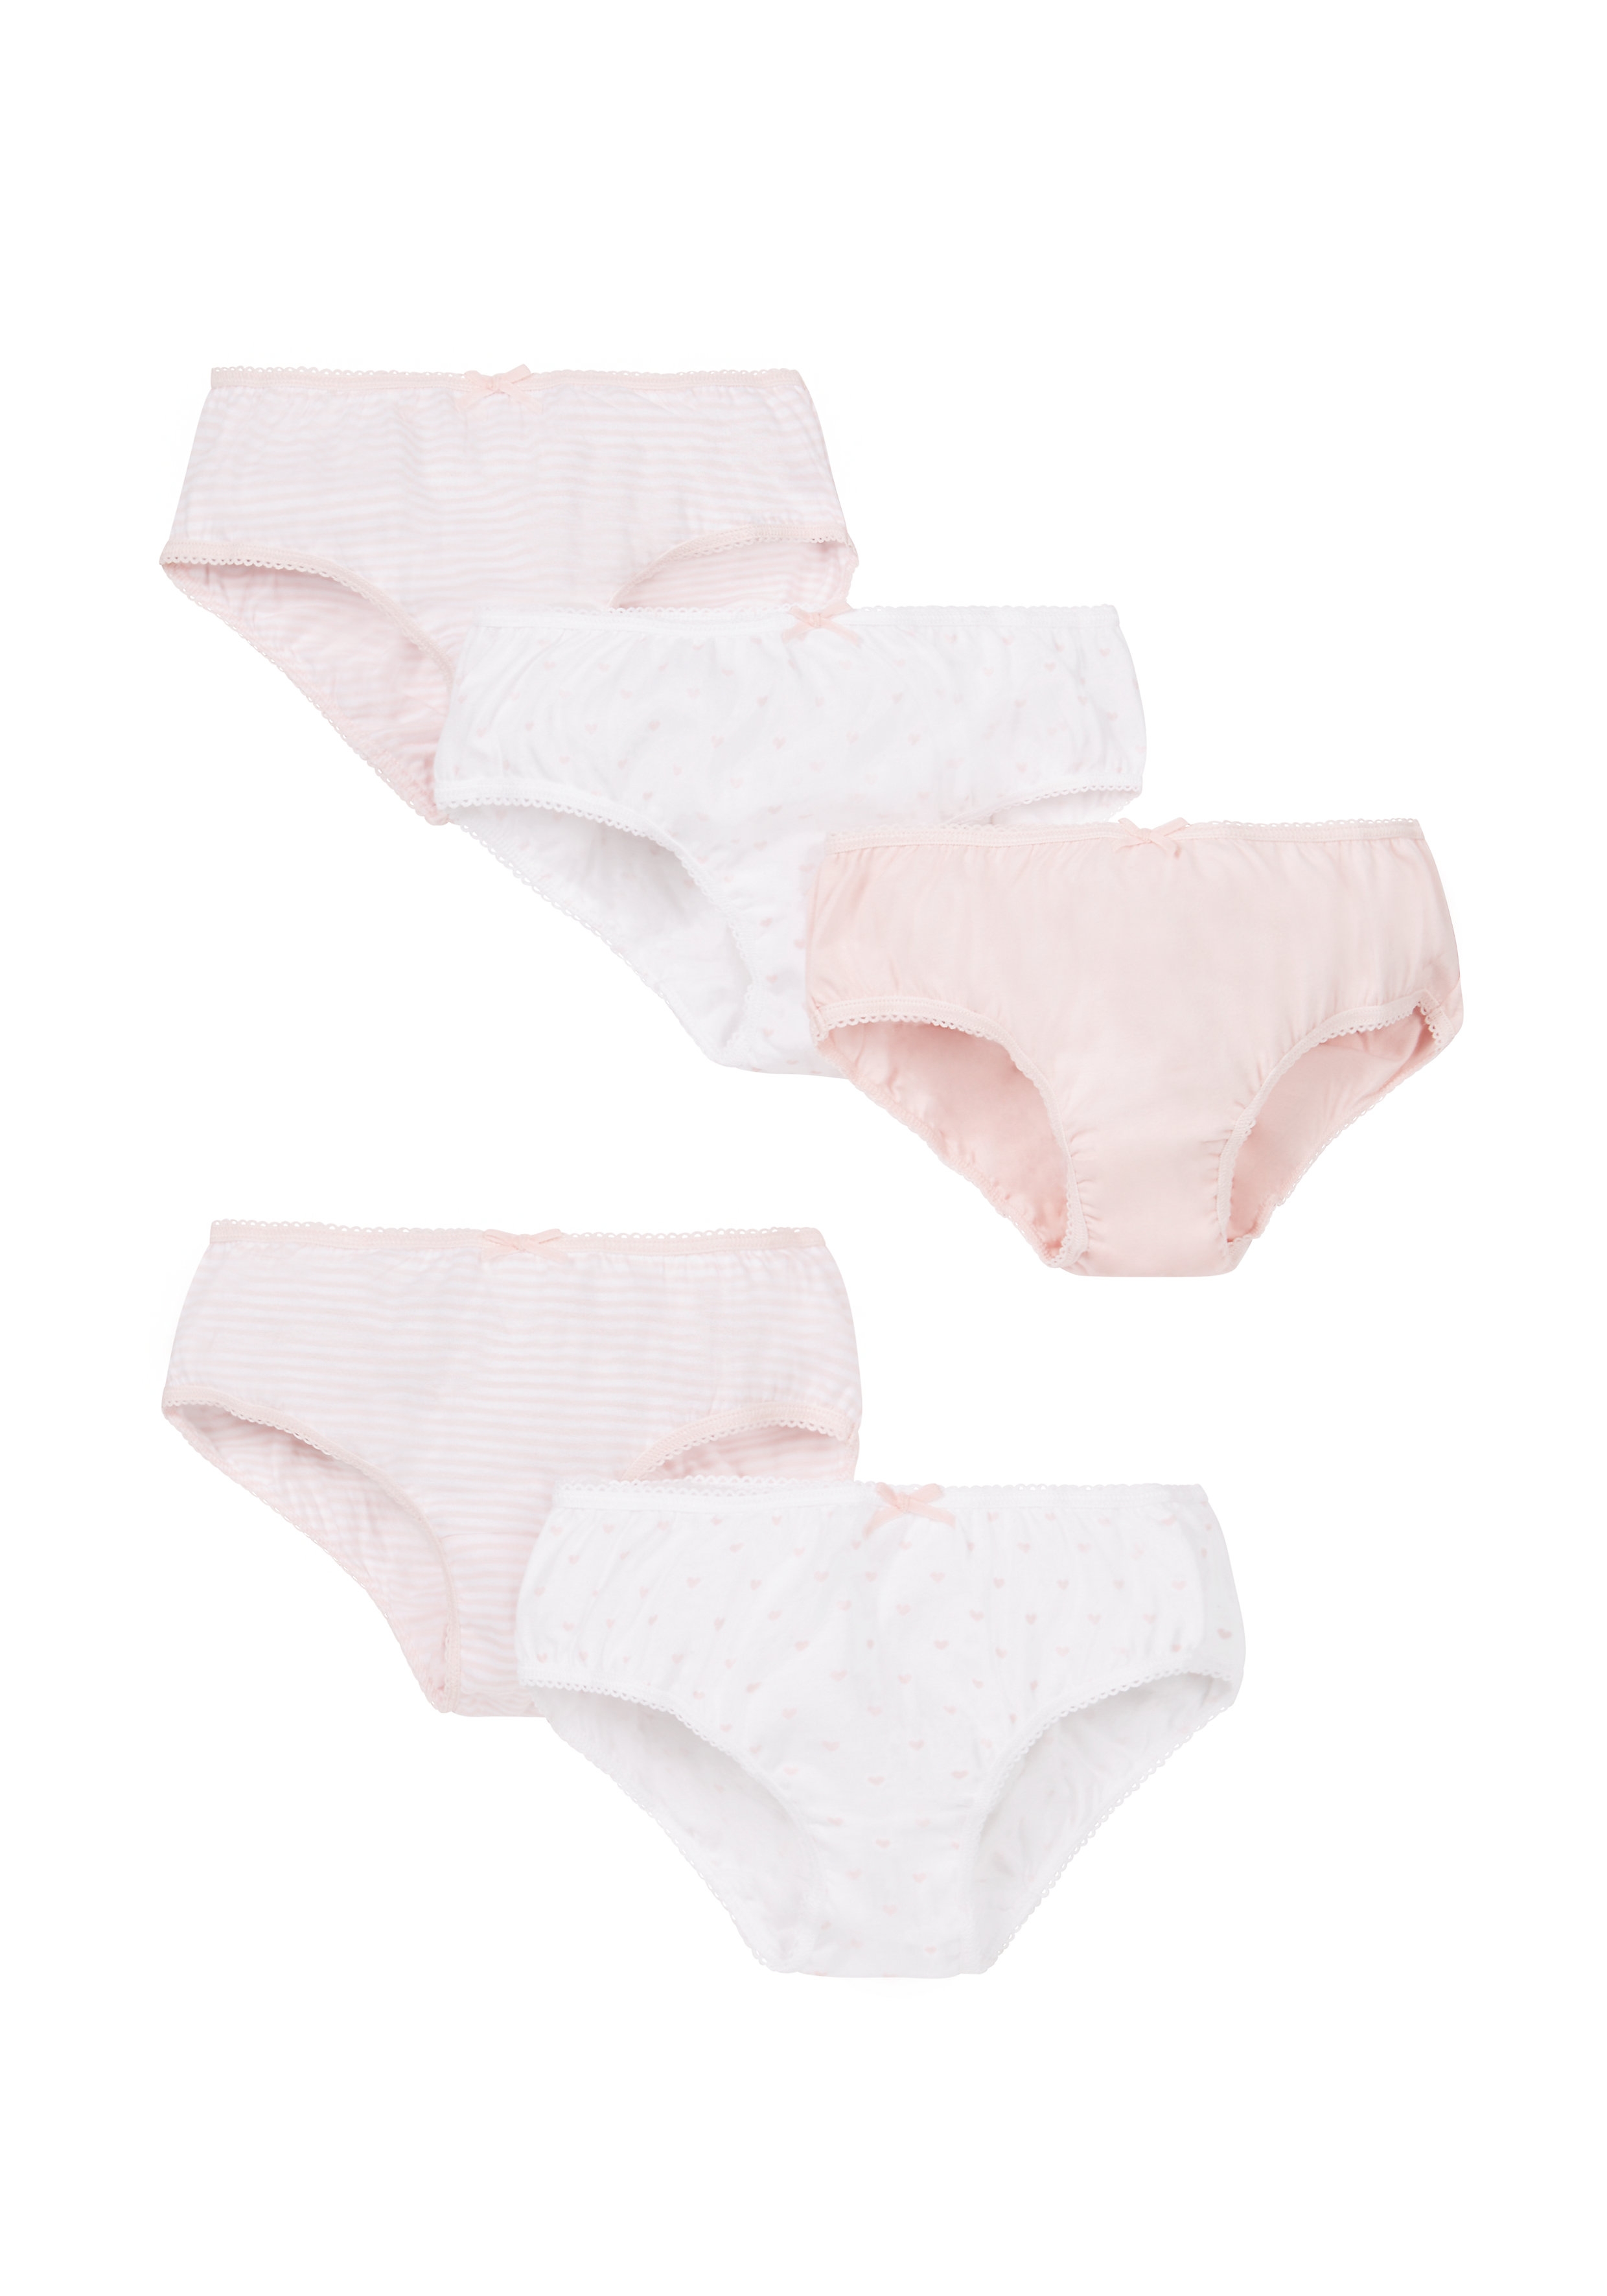 Mothercare | Girls Briefs Striped And Heart Print - Pack Of 5 - Pink